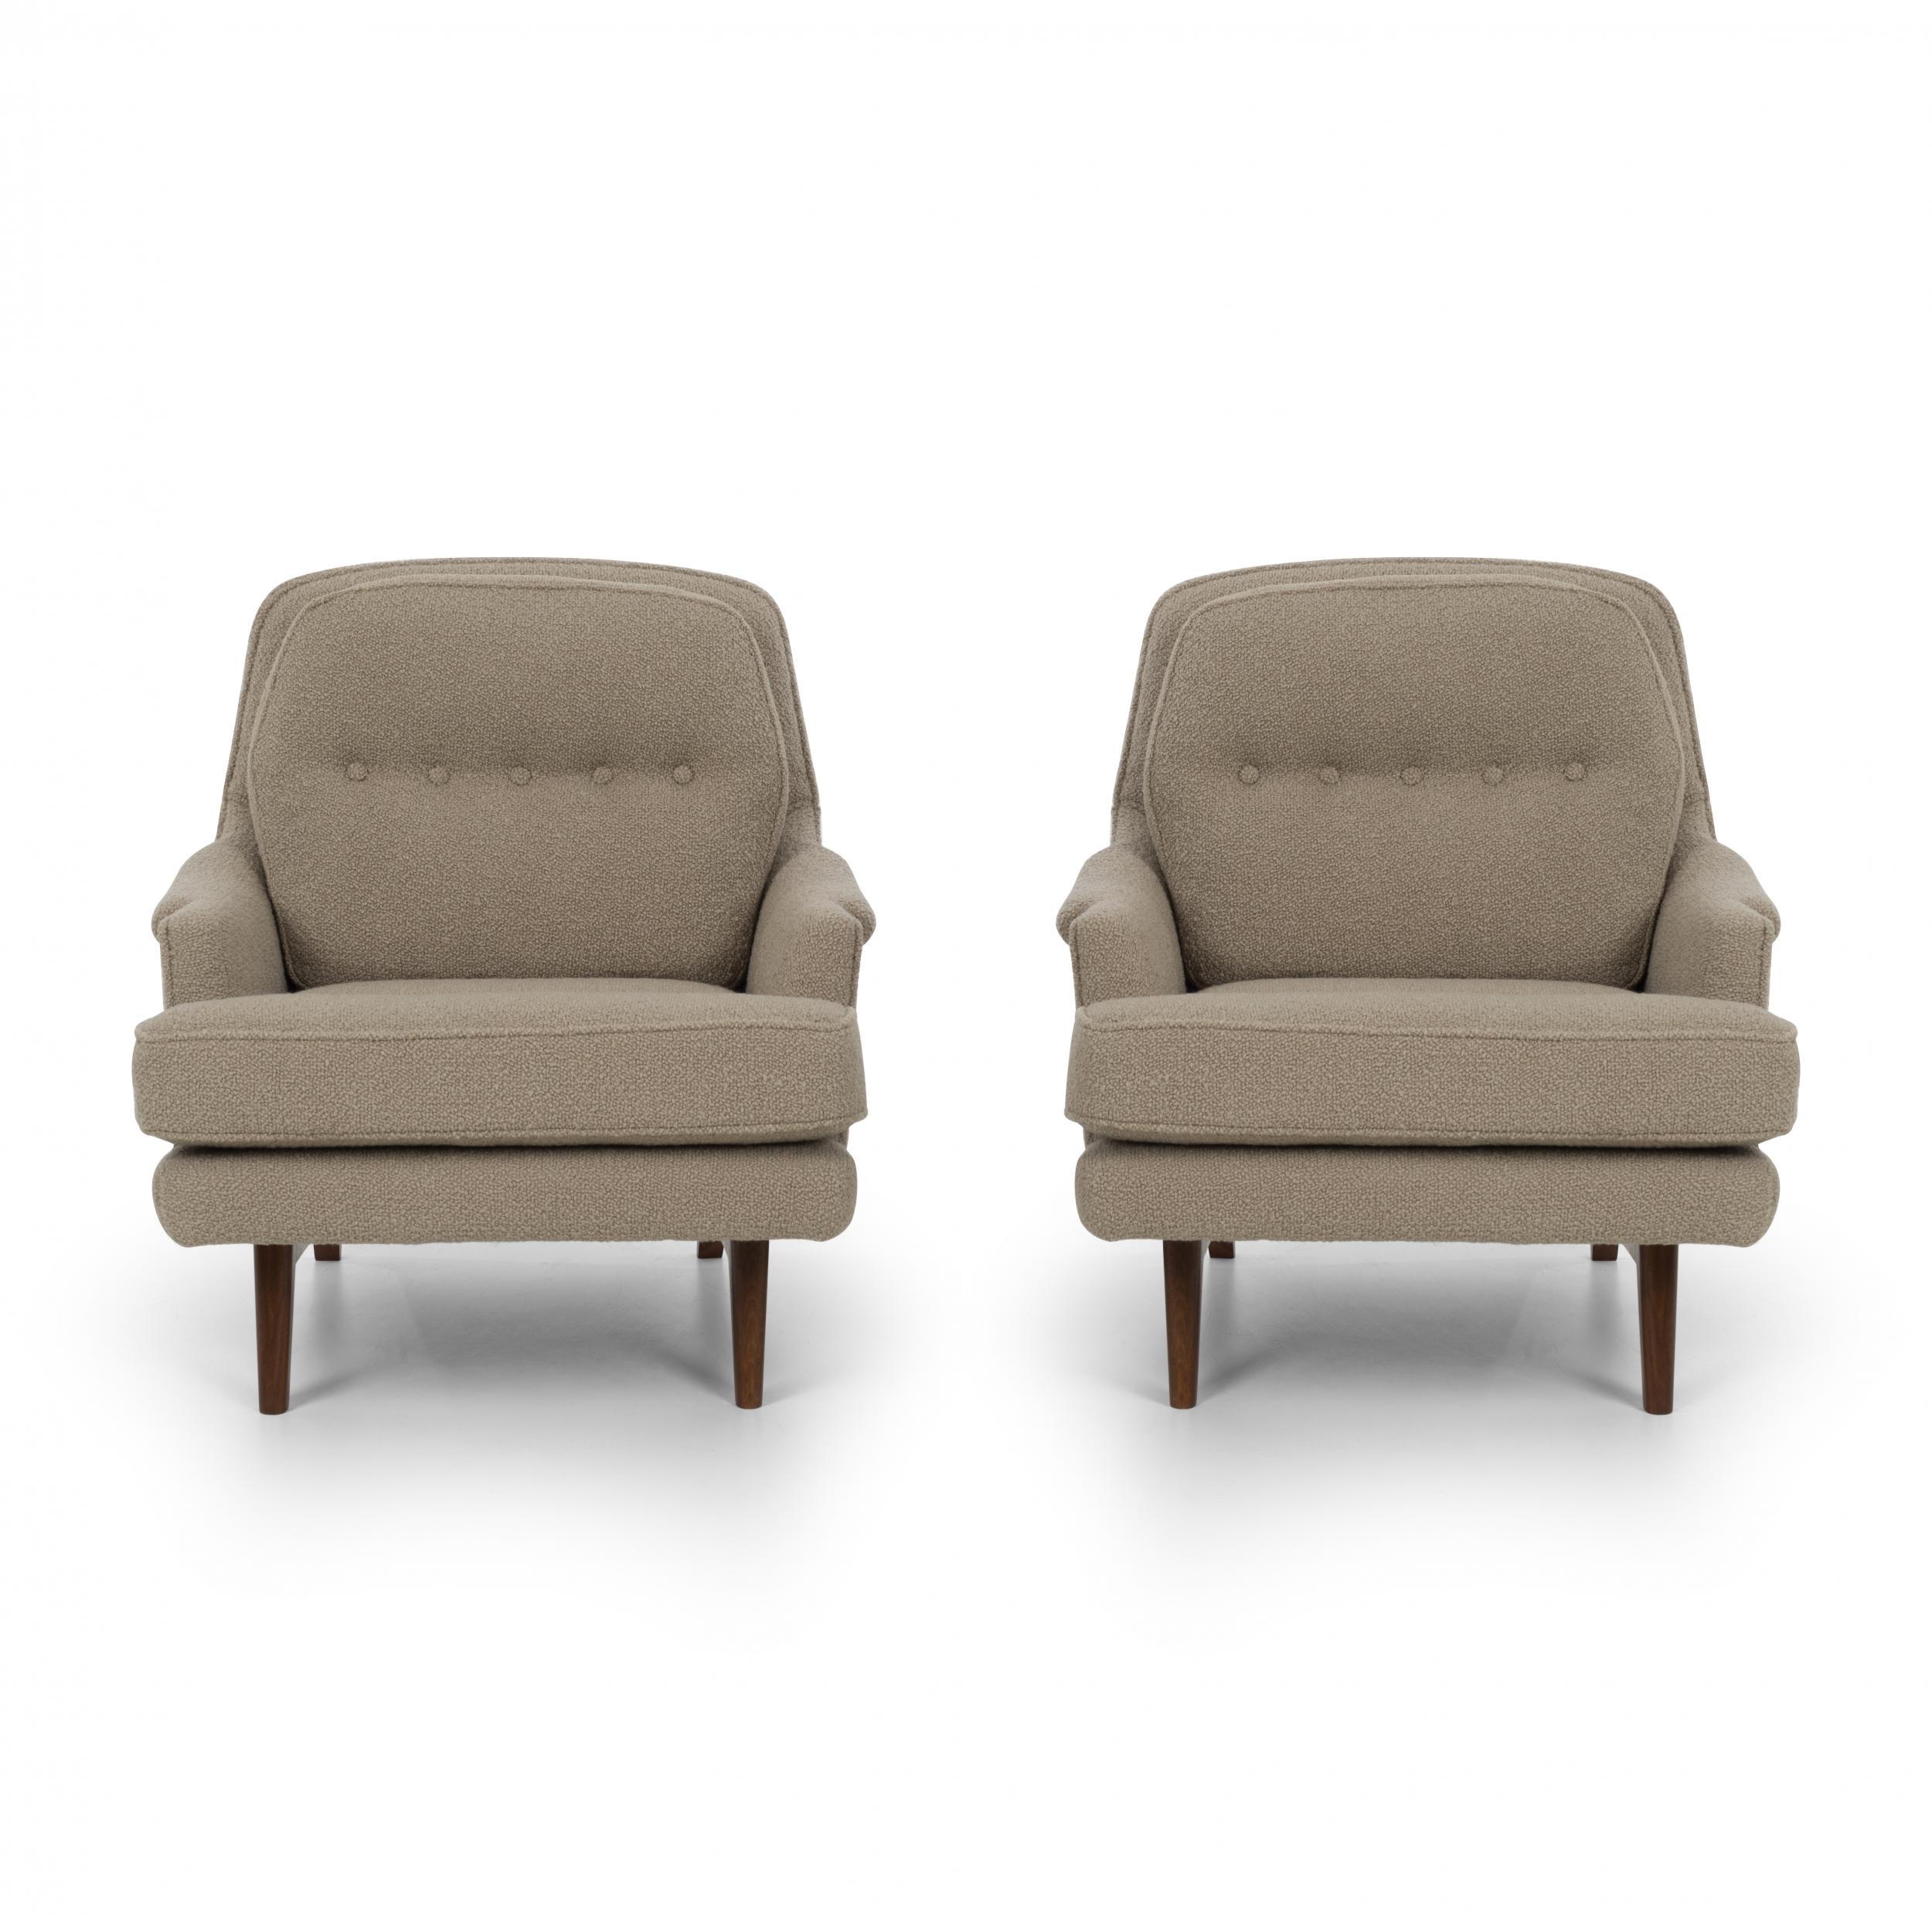 Mid-20th Century Edward Wormley for Dunbar Pair of Lounges Chairs in Knoll Boucle